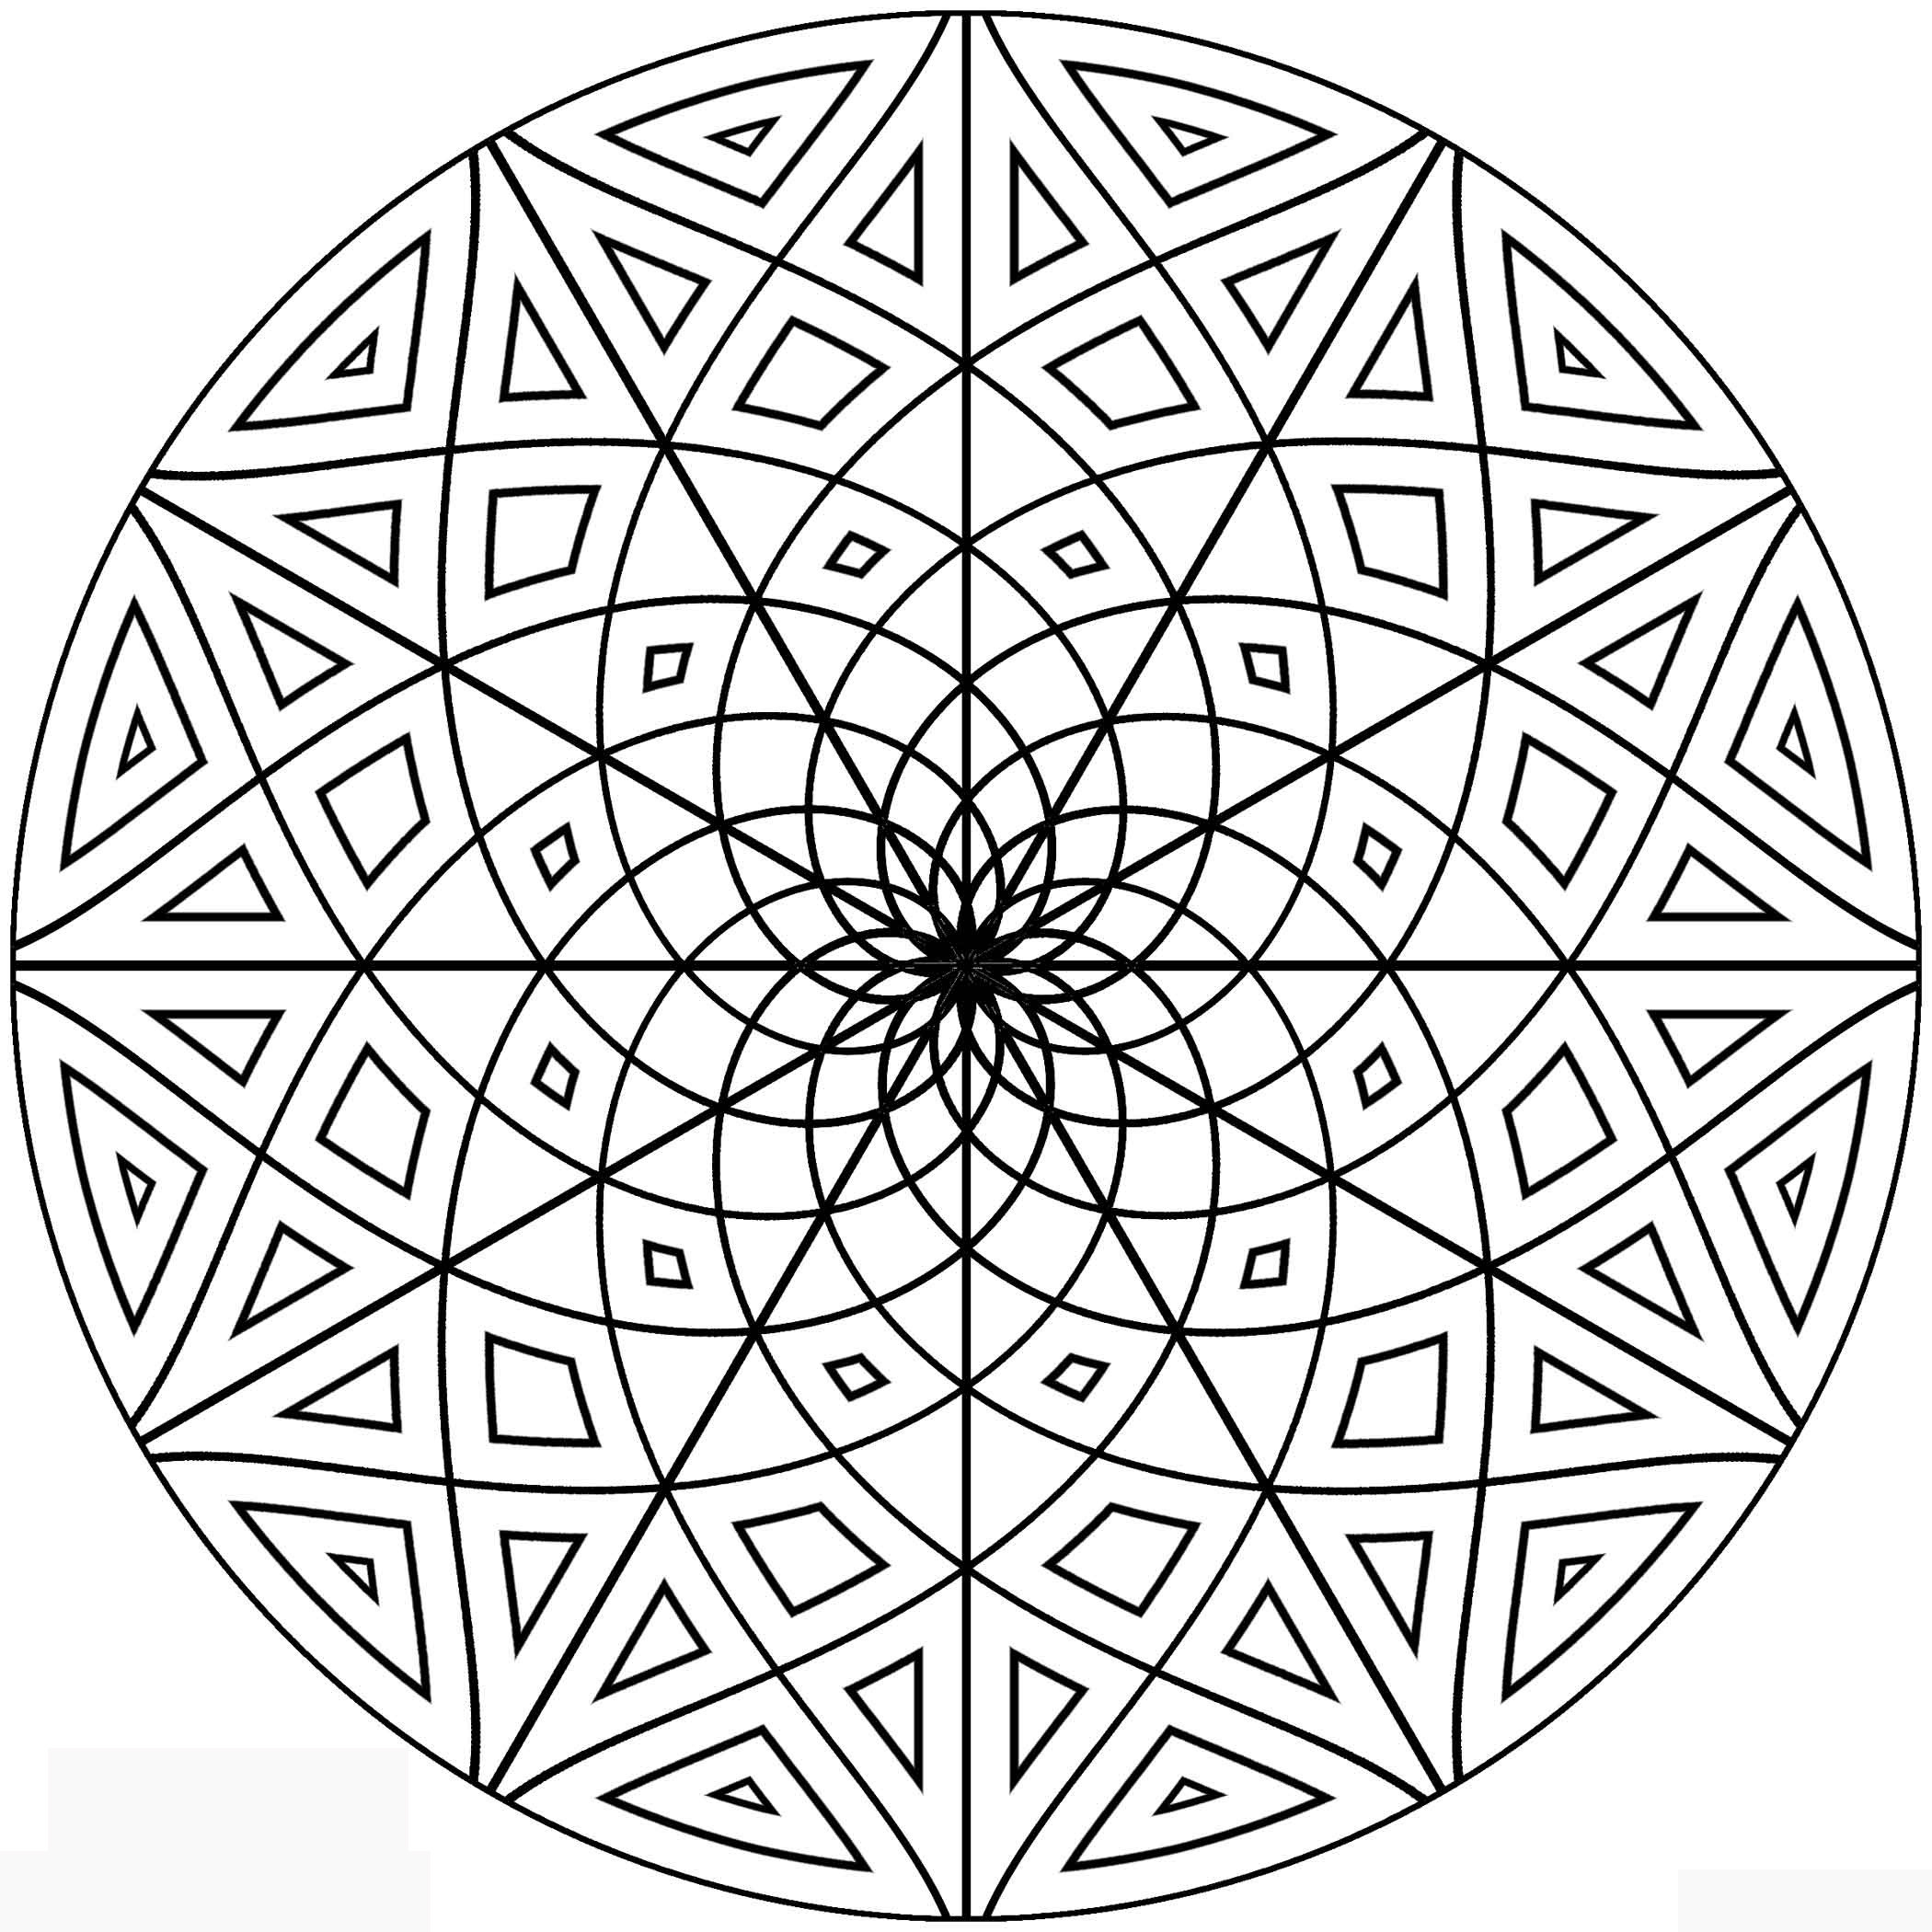 Geometric Adult Coloring Pages
 Free Printable Geometric Coloring Pages for Adults